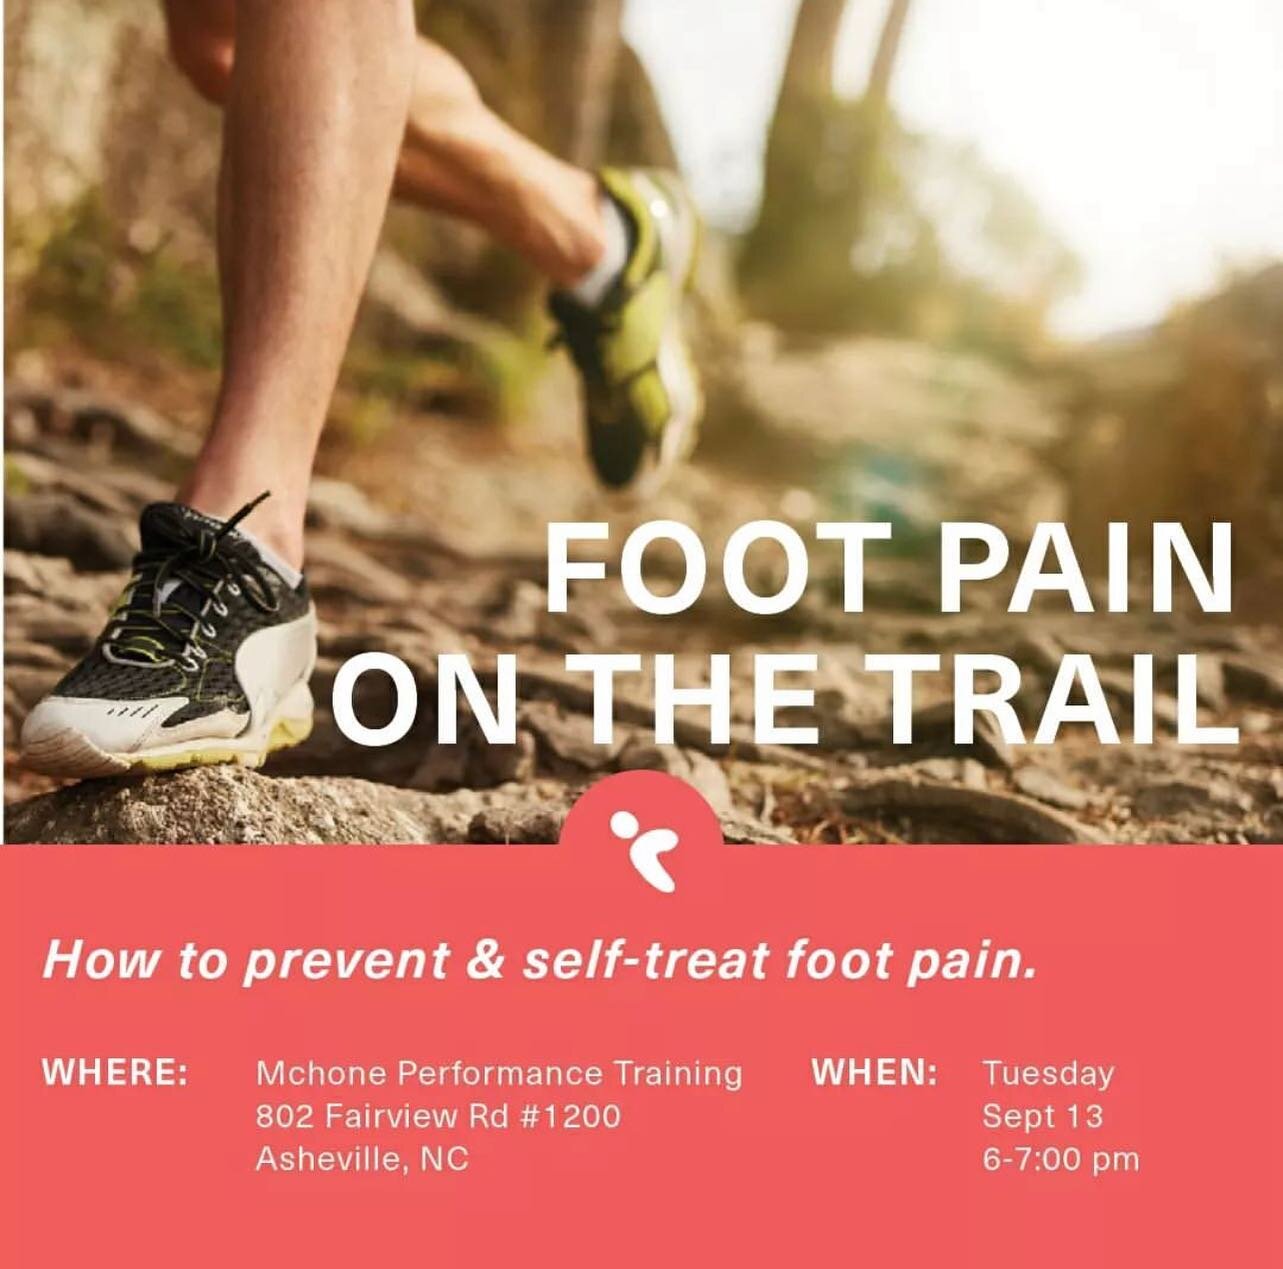 We are stoked to have Physical Therapist Charlotte Walters back to MPT to help keep our mountain folks feeling fit on the trail.

#trailrunning #asheville #footpainrelief #fitforlife #happytravels @mtnwellnesspt